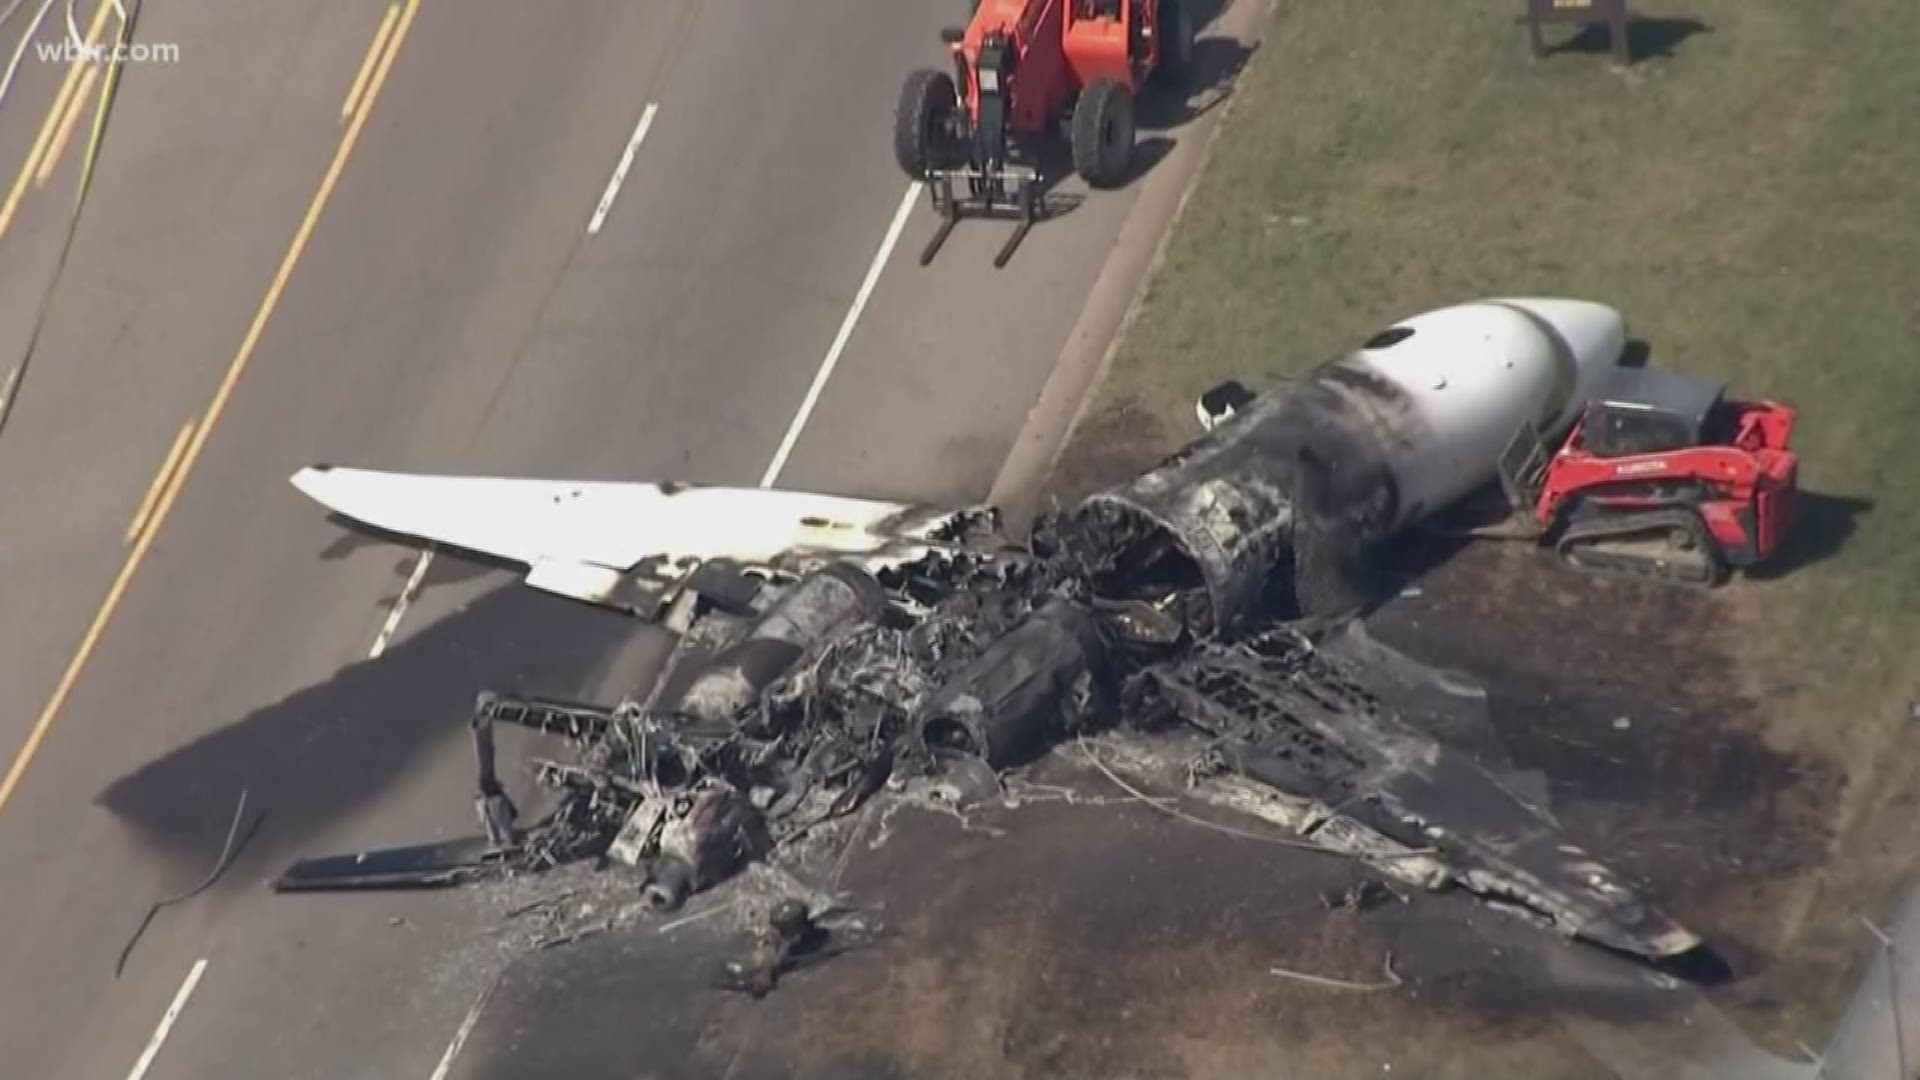 The route had been closed since Thursday when Dale Earnhardt, Jr.'s plane rolled off the runway and onto the road.